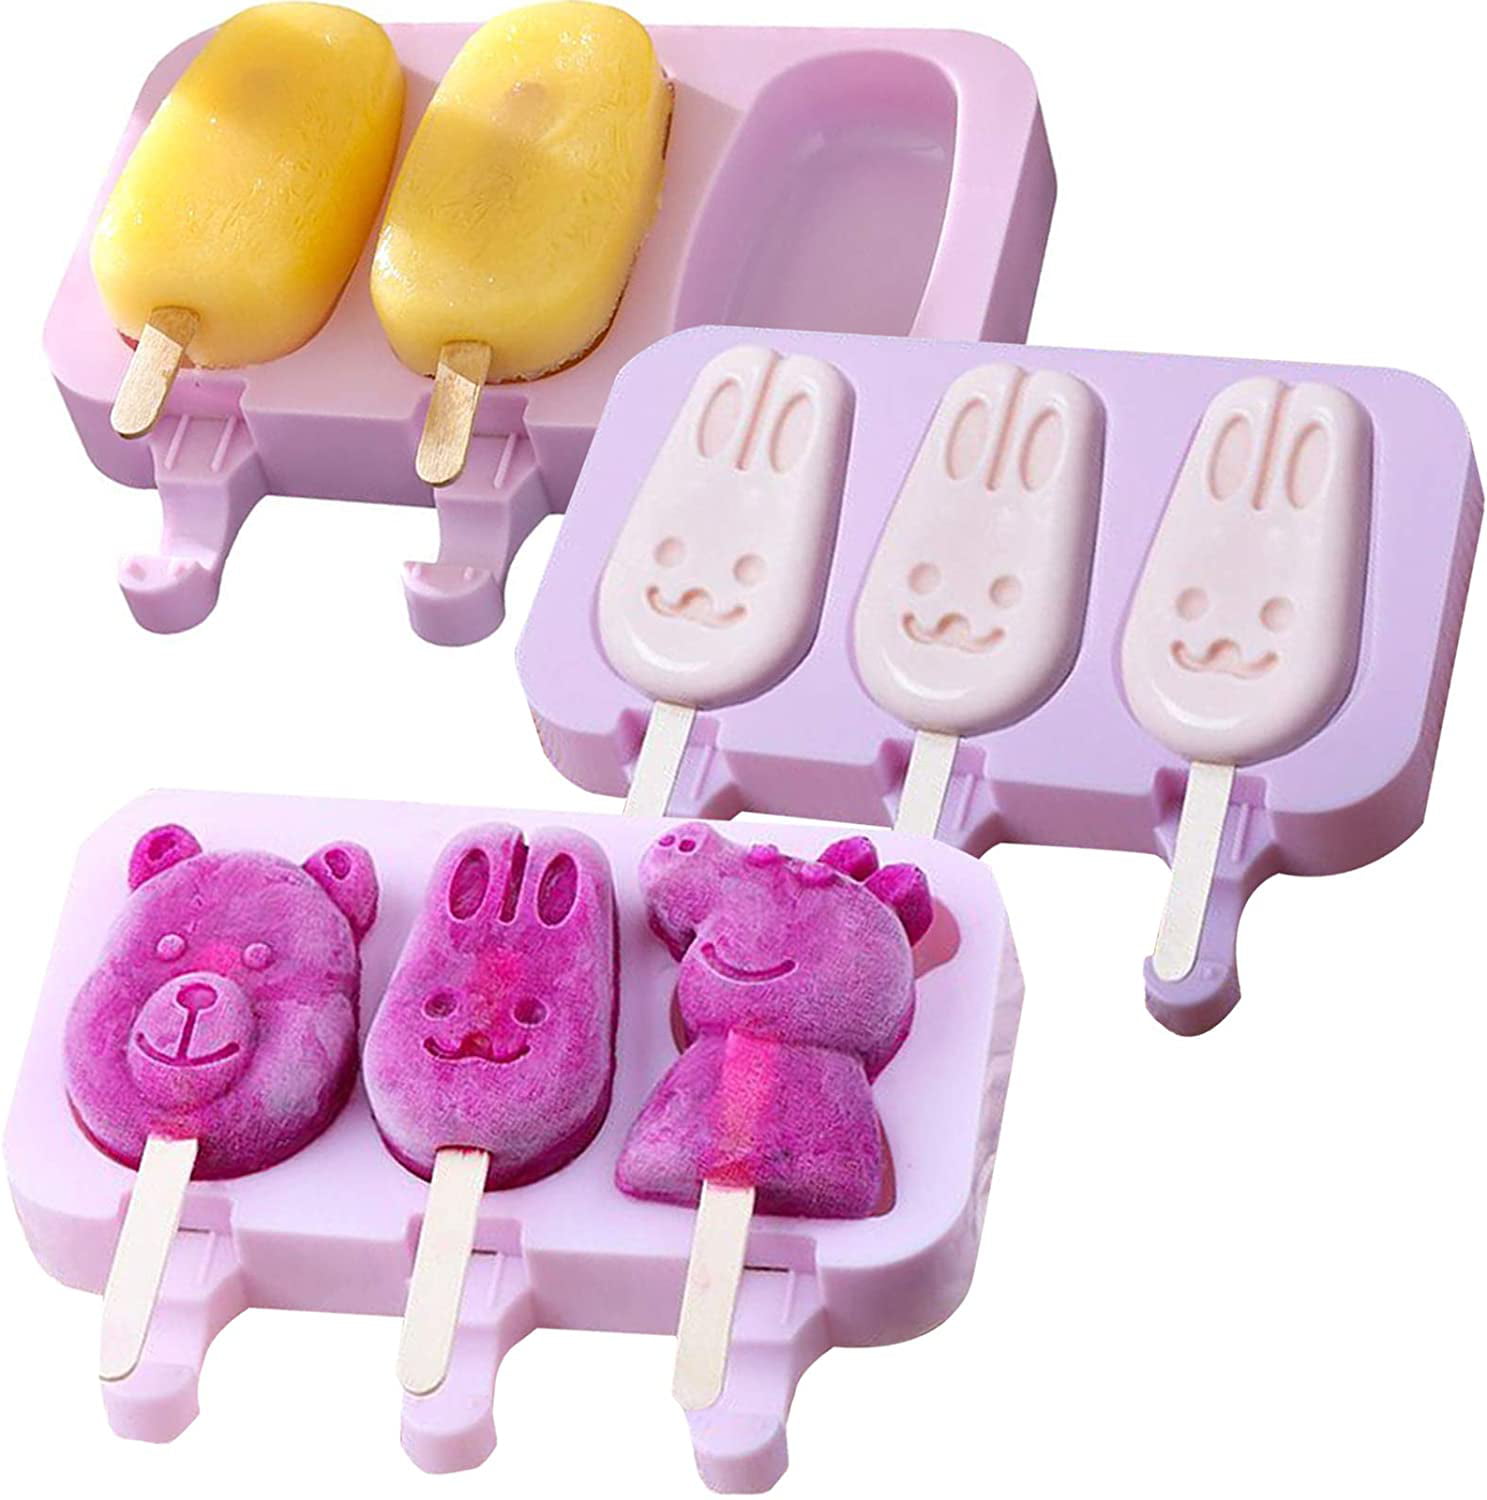 Silicone Frozen Ice Cream Mold Juice Popsicle Maker Ice Lolly Mould 2 Cavities 